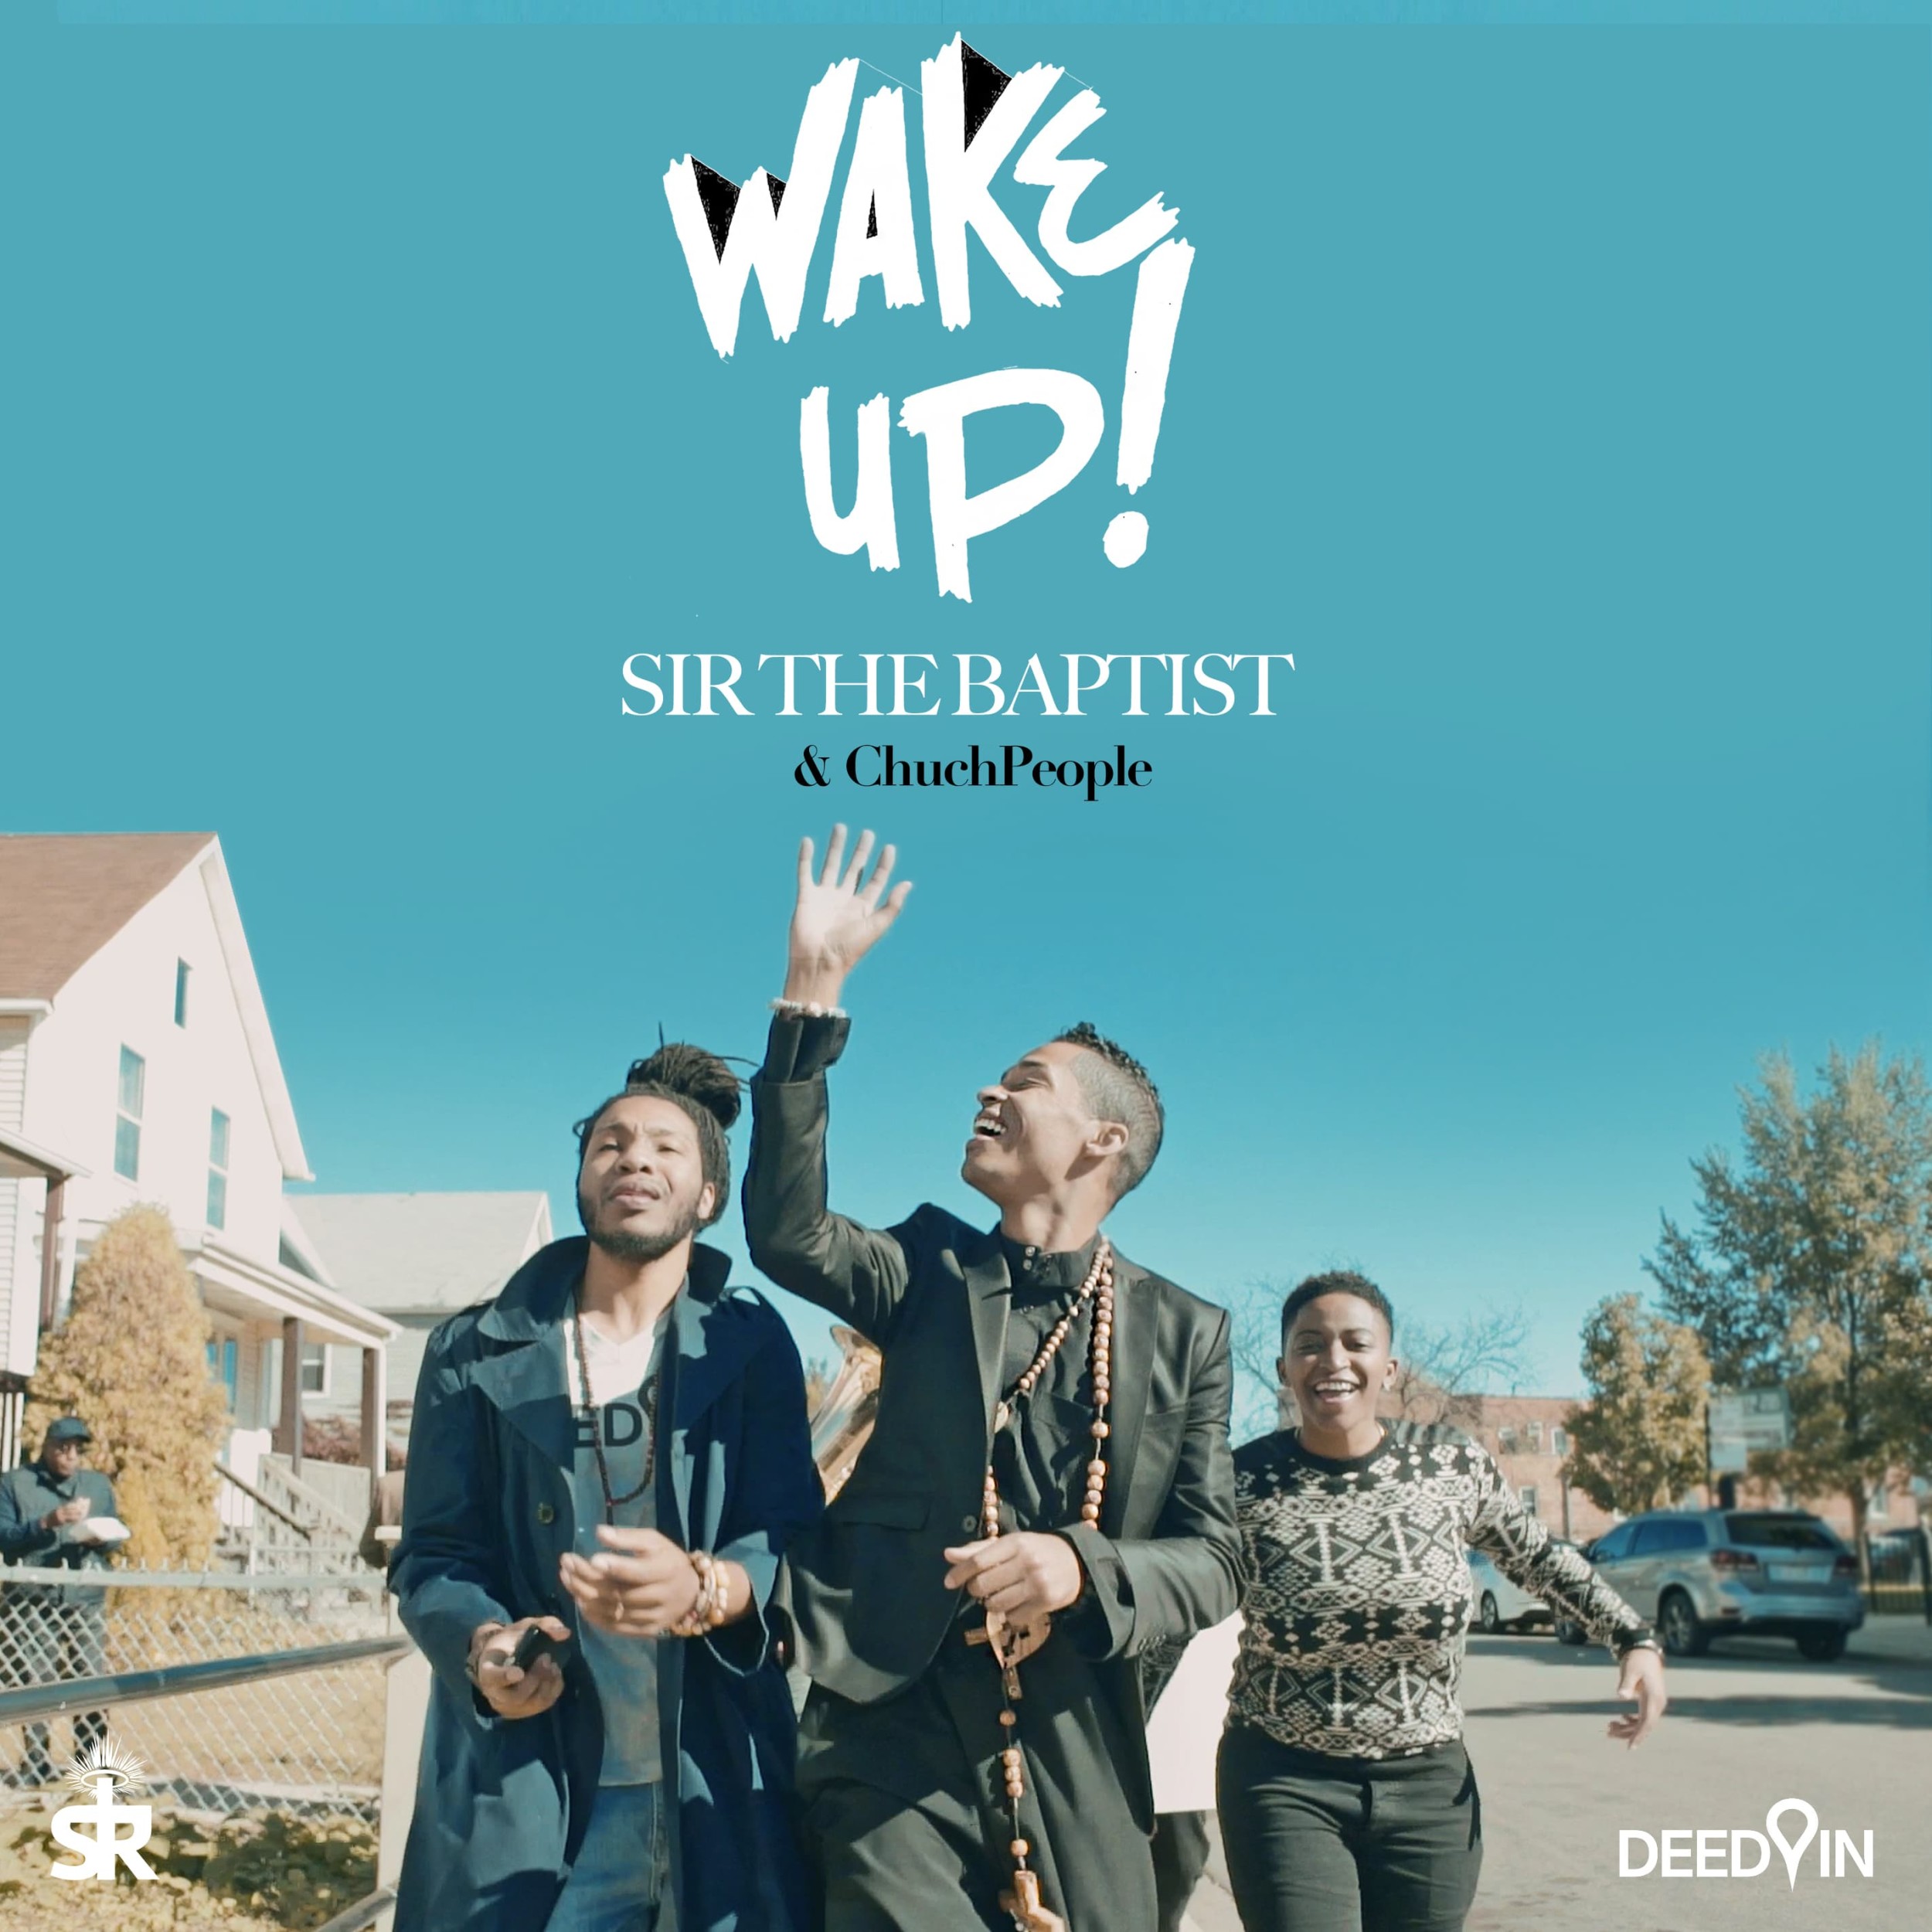 Let’s Change The World w/ Sir the Baptist & His “Wake Up” Visual